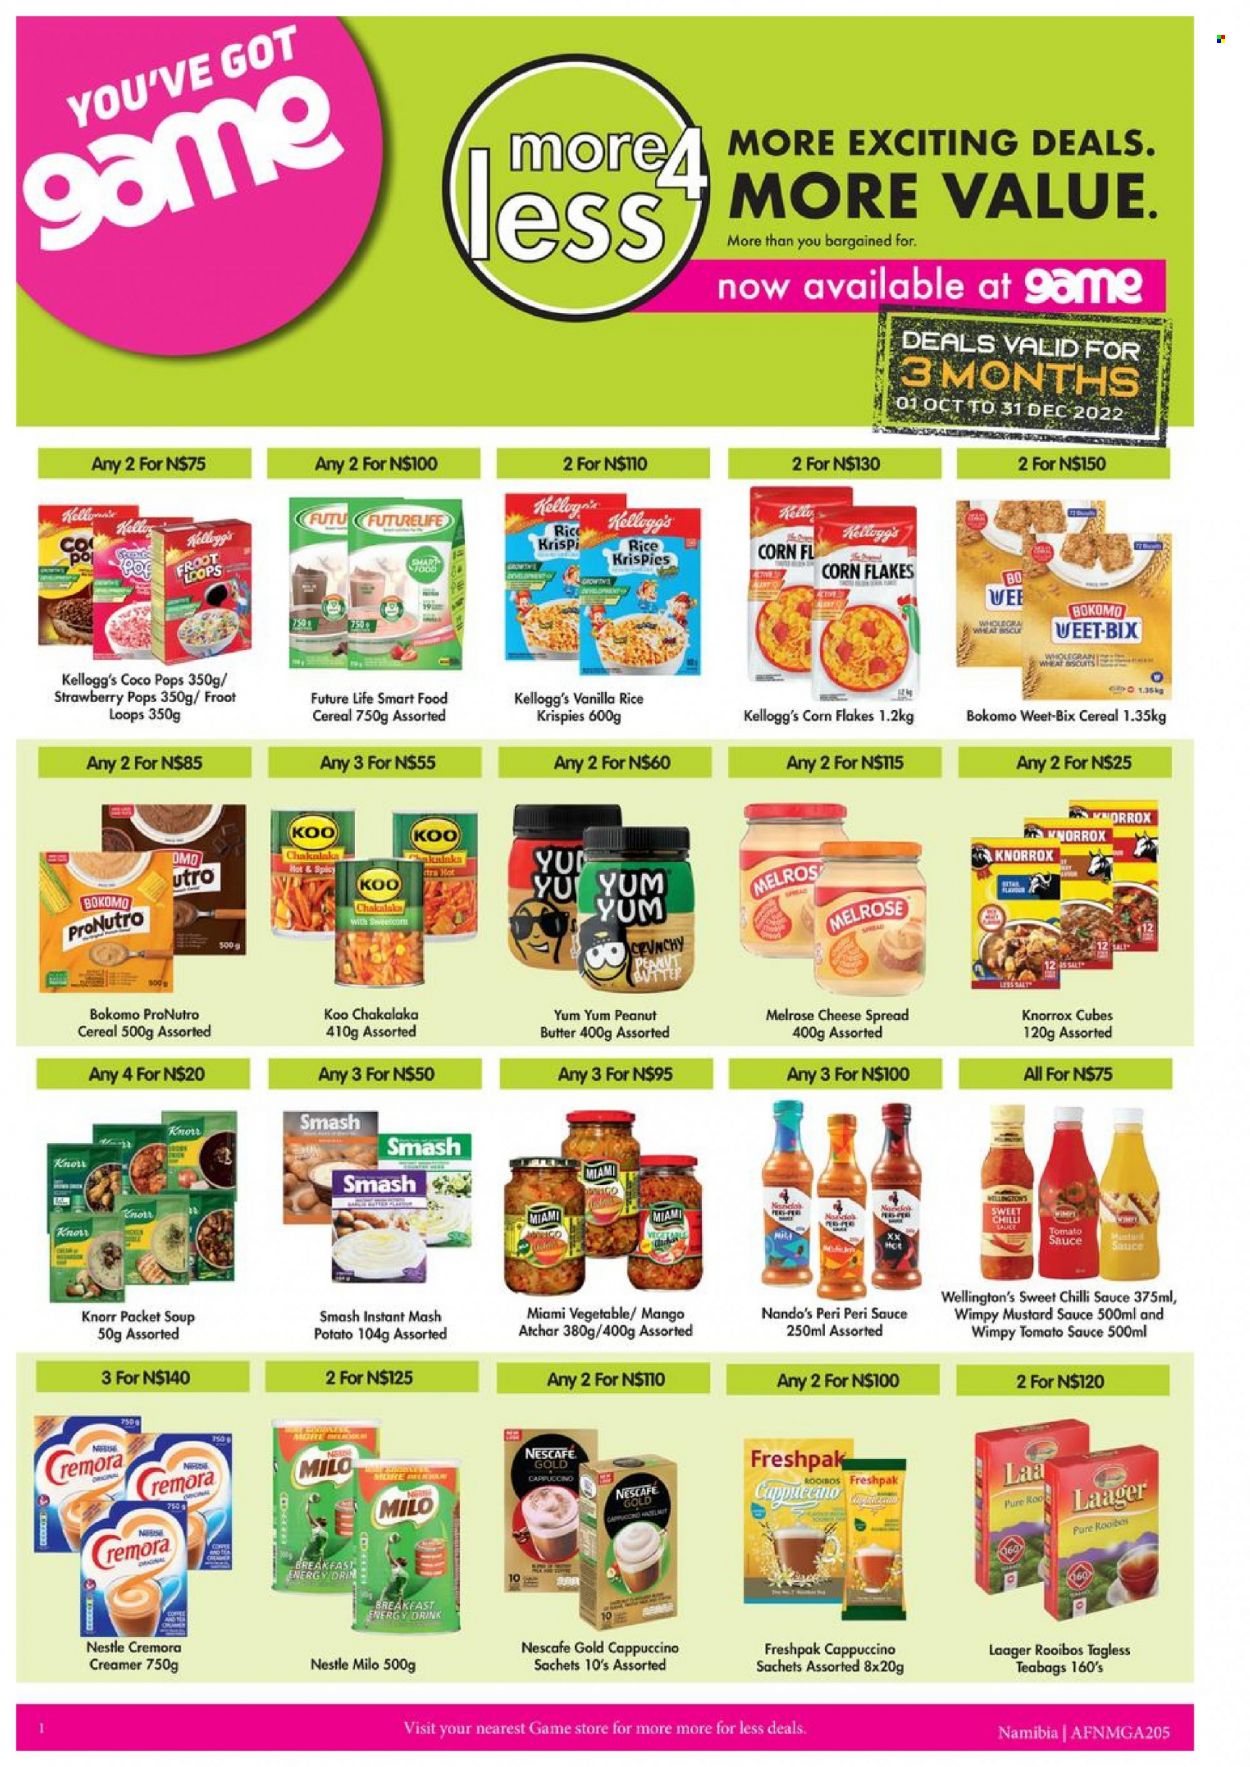 Game catalogue  - 01/10/2022 - 31/12/2022 - Sales products - soup, Knorr, sauce, chakalaka, ham, cheese spread, Melrose, Milo, creamer, Nestlé, cereal bar, Kellogg's, biscuit, Cremora, Knorrox, tomato sauce, Koo, cereals, corn flakes, coco pops, Weet-Bix, ProNutro, Rice Krispies, mustard, chilli sauce, mustard sauce, sweet chilli sauce, peri peri sauce, atchar, peanut butter, energy drink, tea bags, rooibos tea, cappuccino, Nescafé, Omo. Page 1.